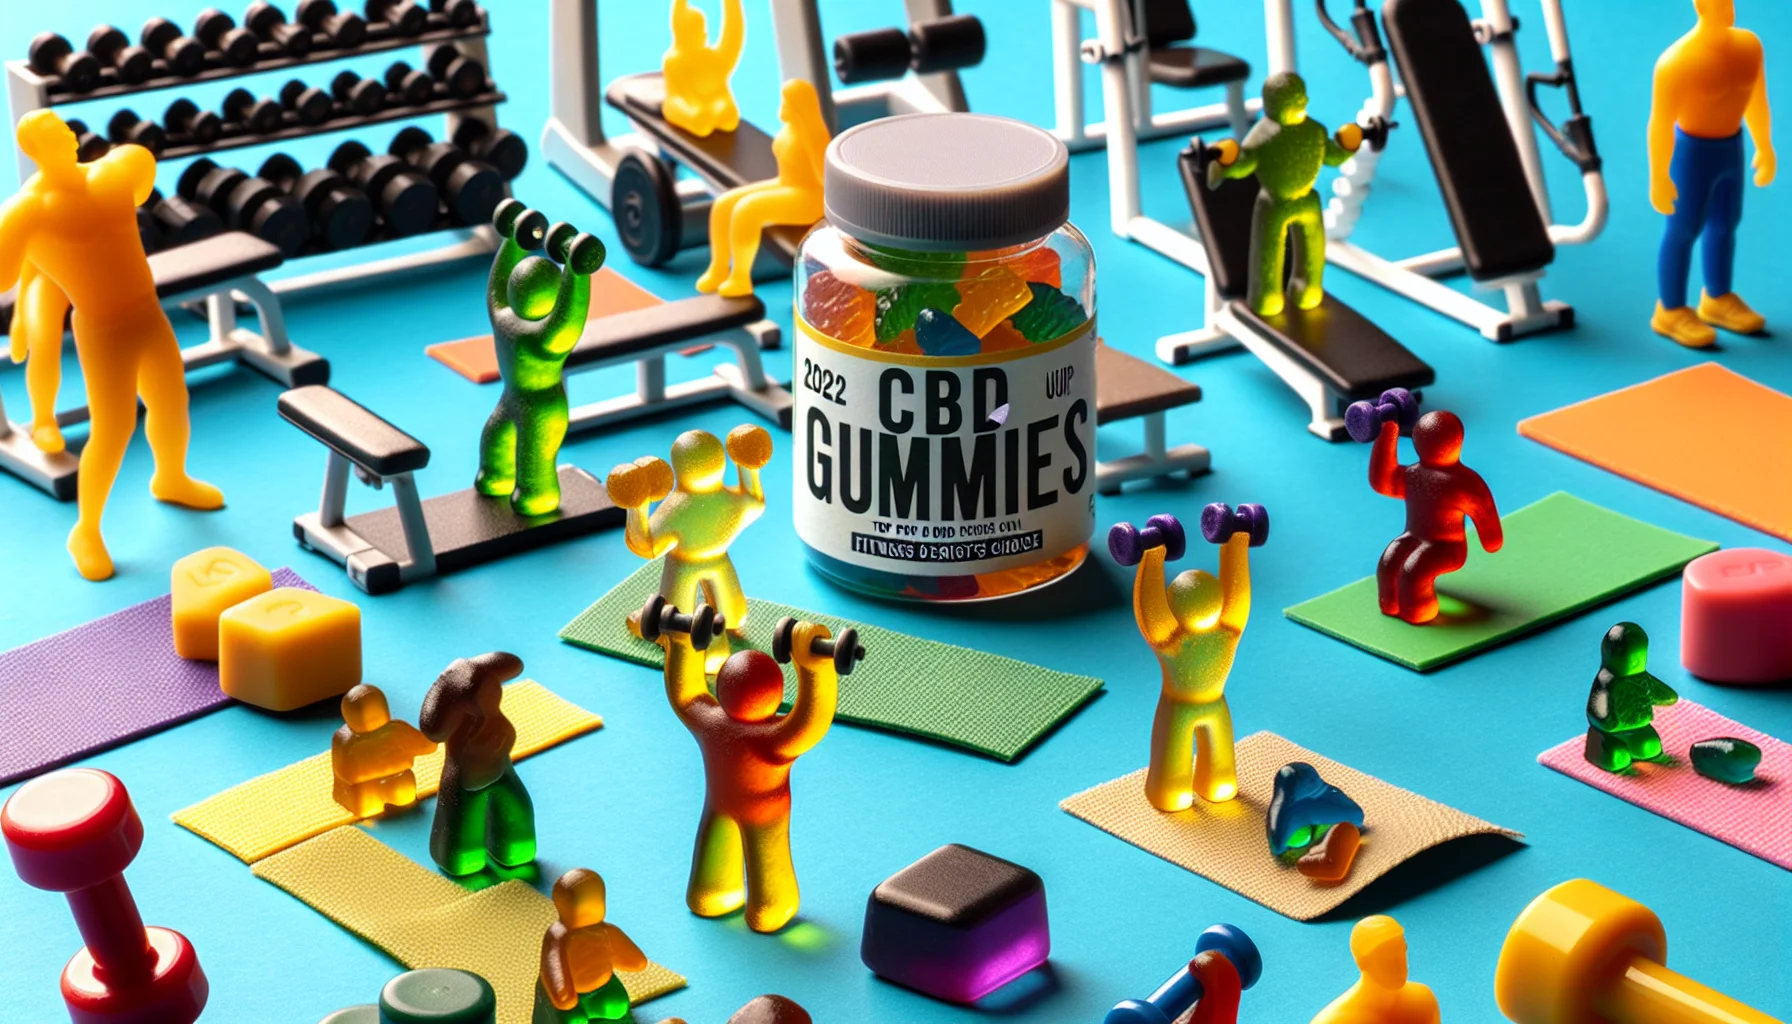 Create a detailed image showcasing a selection of top CBD gummies, labelled as the '2022 UK Fitness Enthusiast's Choice'. The image has a humorous touch: we see the gummies lifting tiny, proportionally accurate dumbbells and doing yoga poses, making it seem as if they're exercising. The CBD gummies should look colourful, attractive, and tempting. The background is filled with typical gym furnishings, like treadmills, weight benches, and yoga mats, all to scale with the 'exercising' gummies. The image should be crafted in a way to entice the viewer to be involved in physical fitness activities.